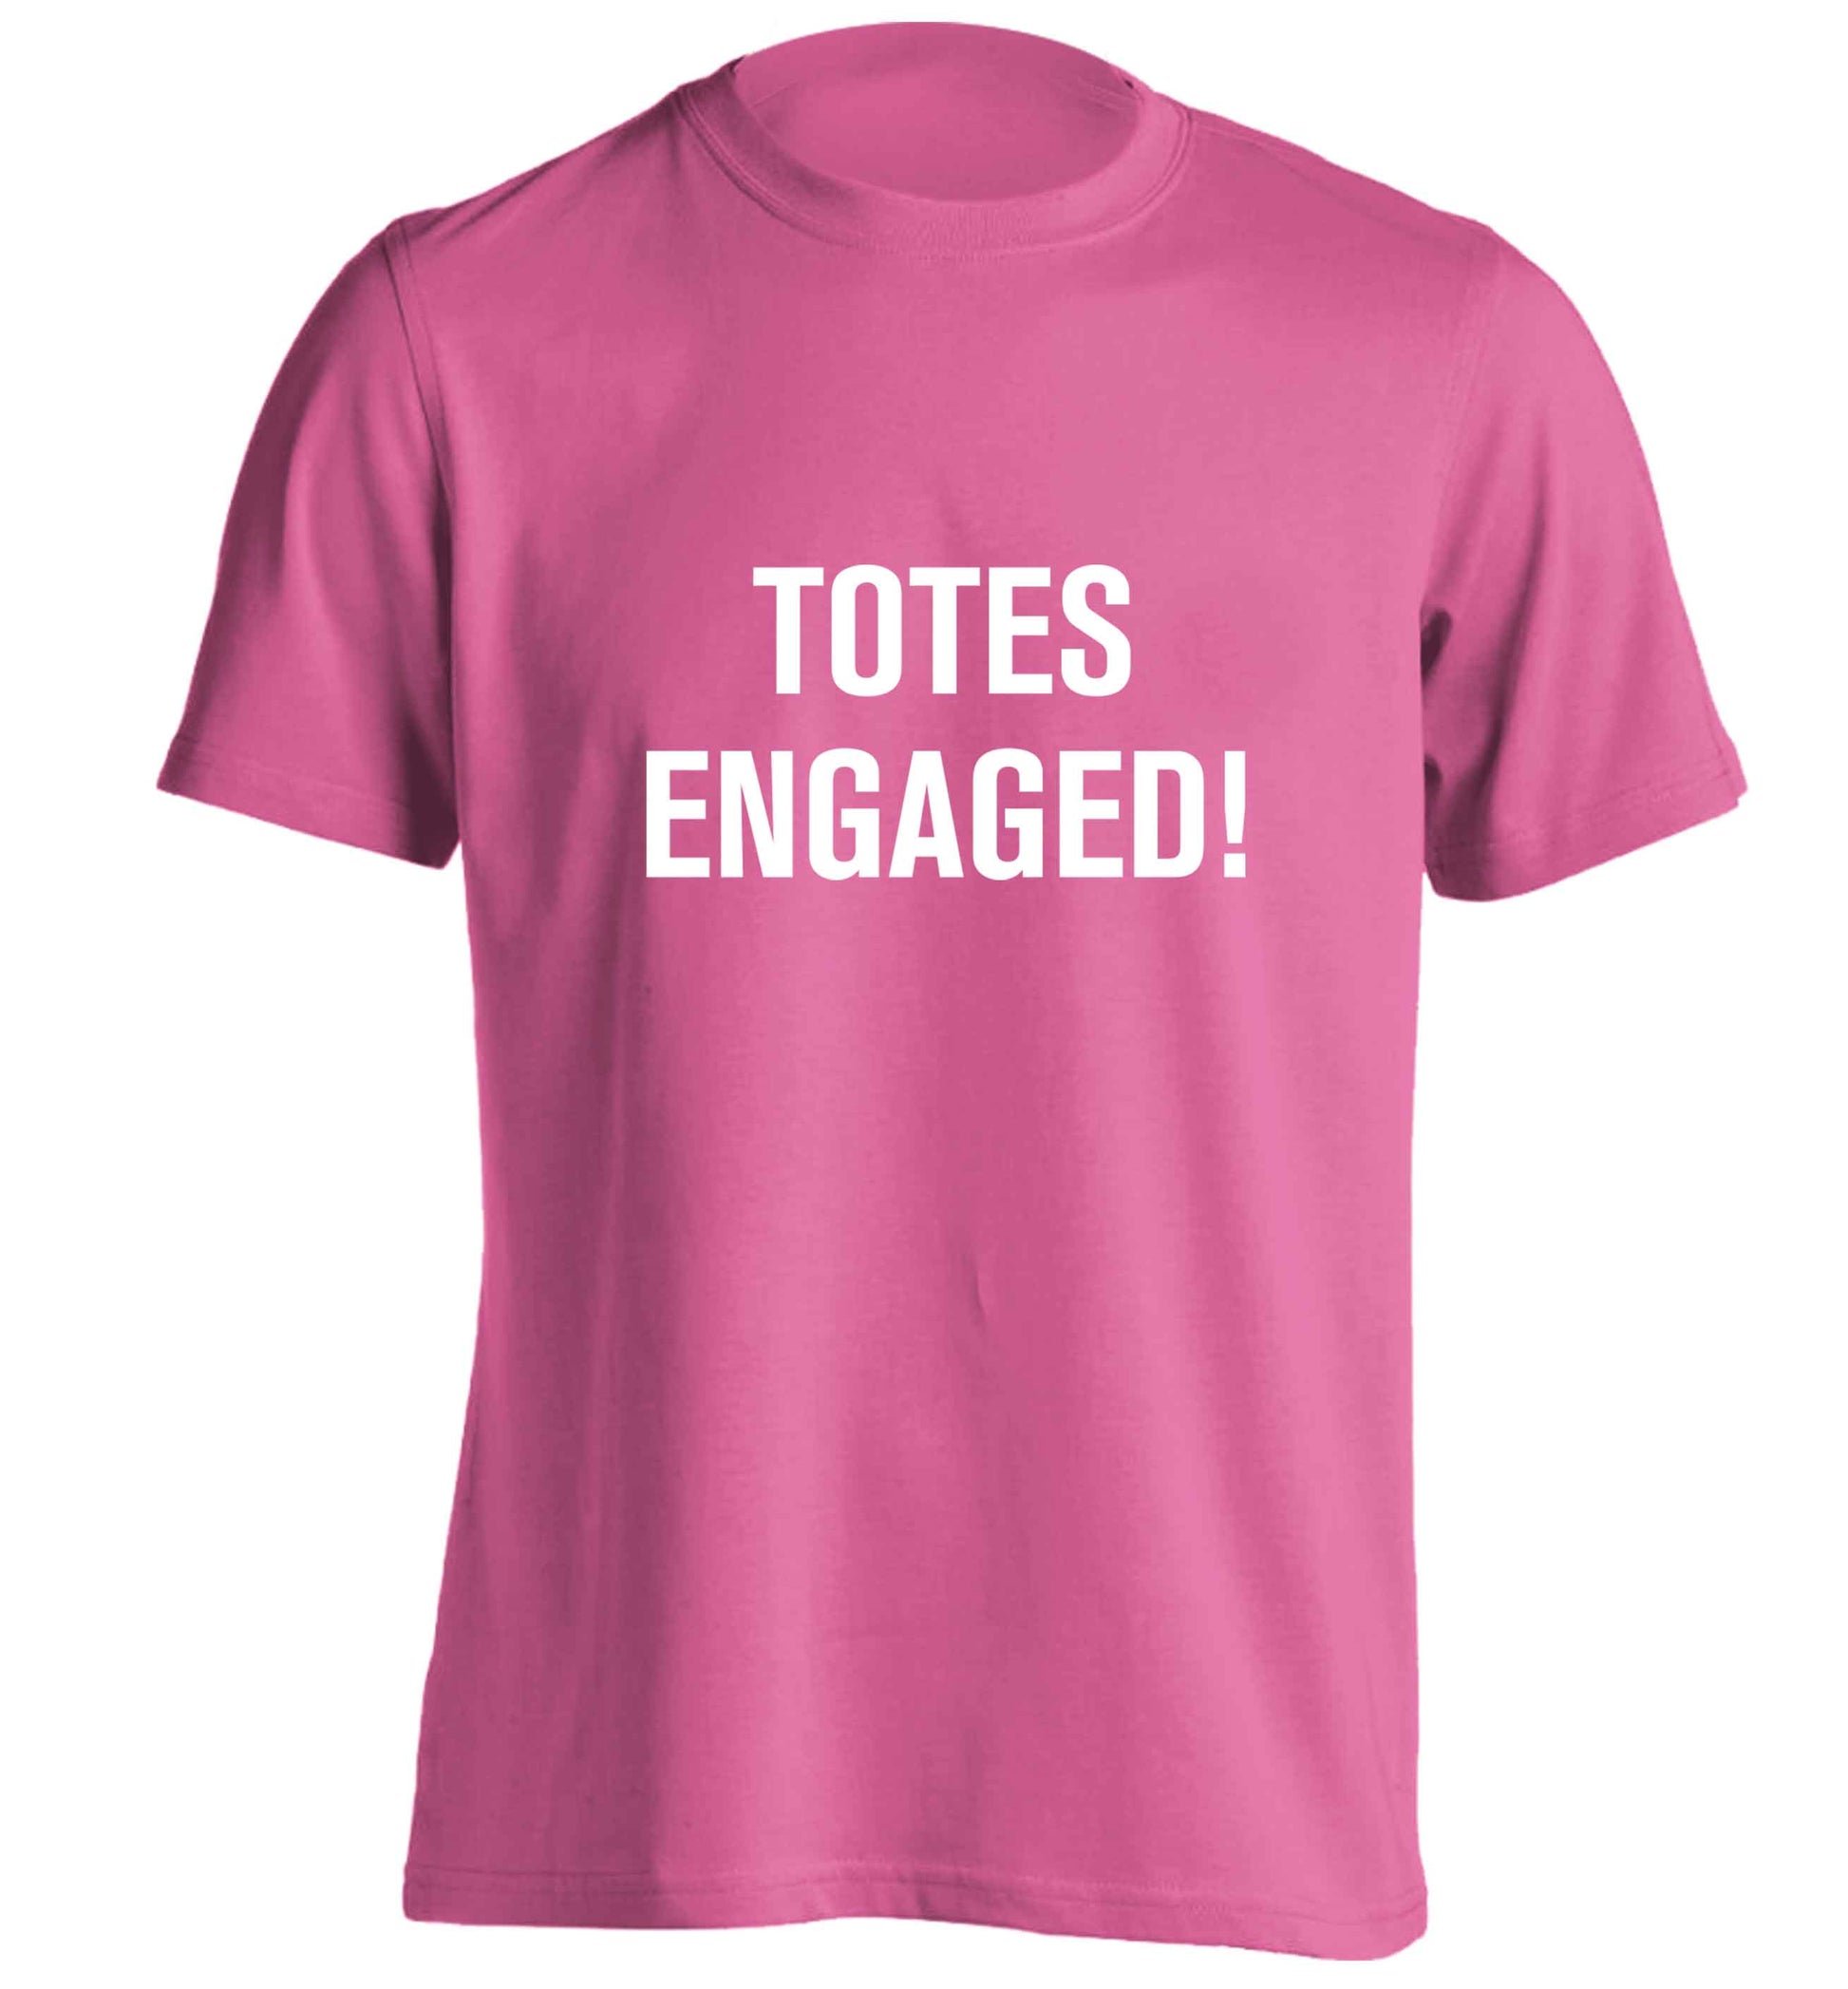 Totes engaged adults unisex pink Tshirt 2XL